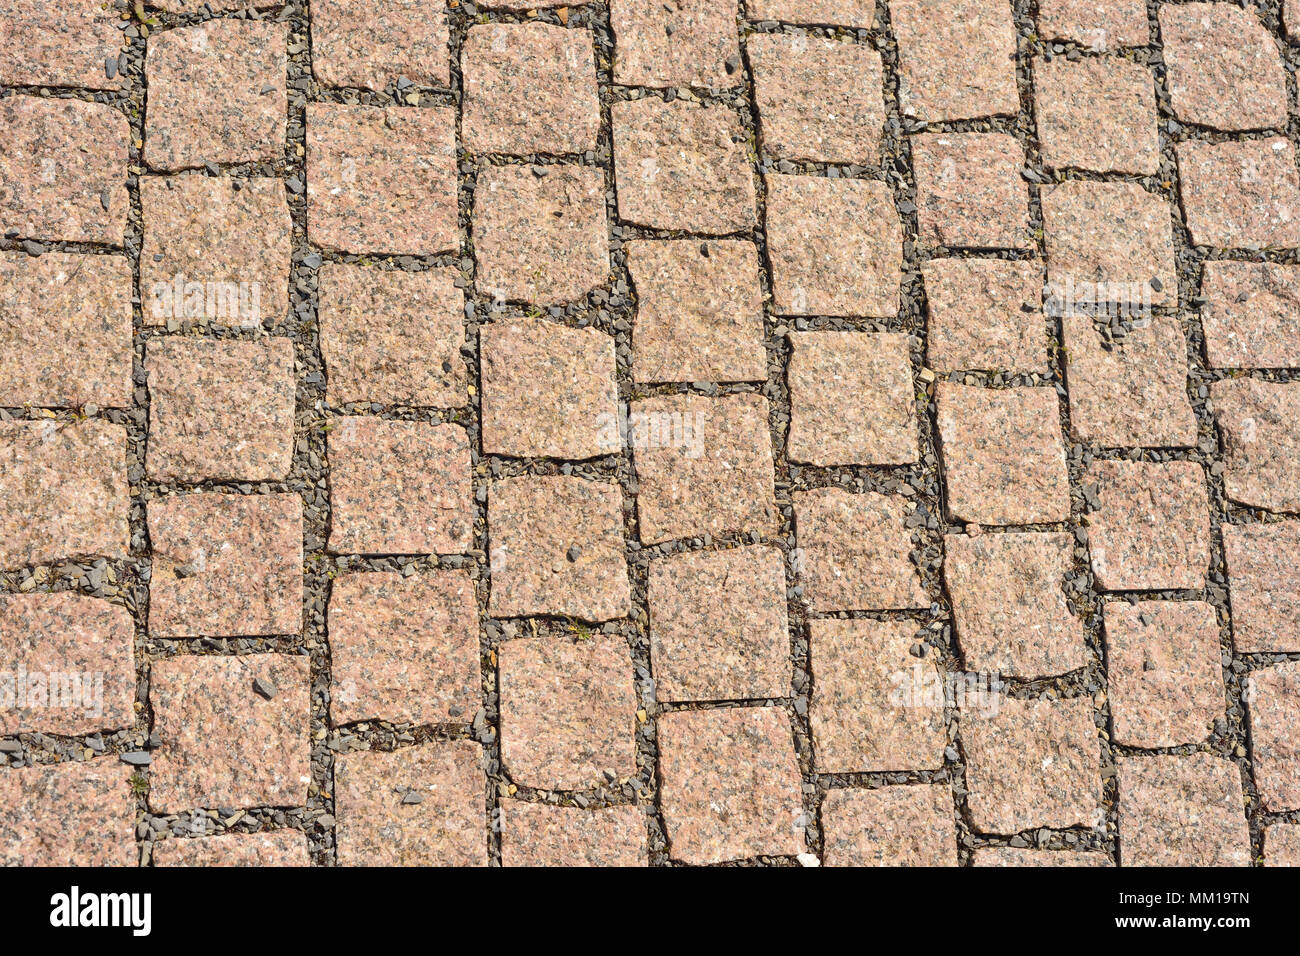 Pavement of gray square granite tiles. Neat square pieces of red granite in a lined path Stock Photo